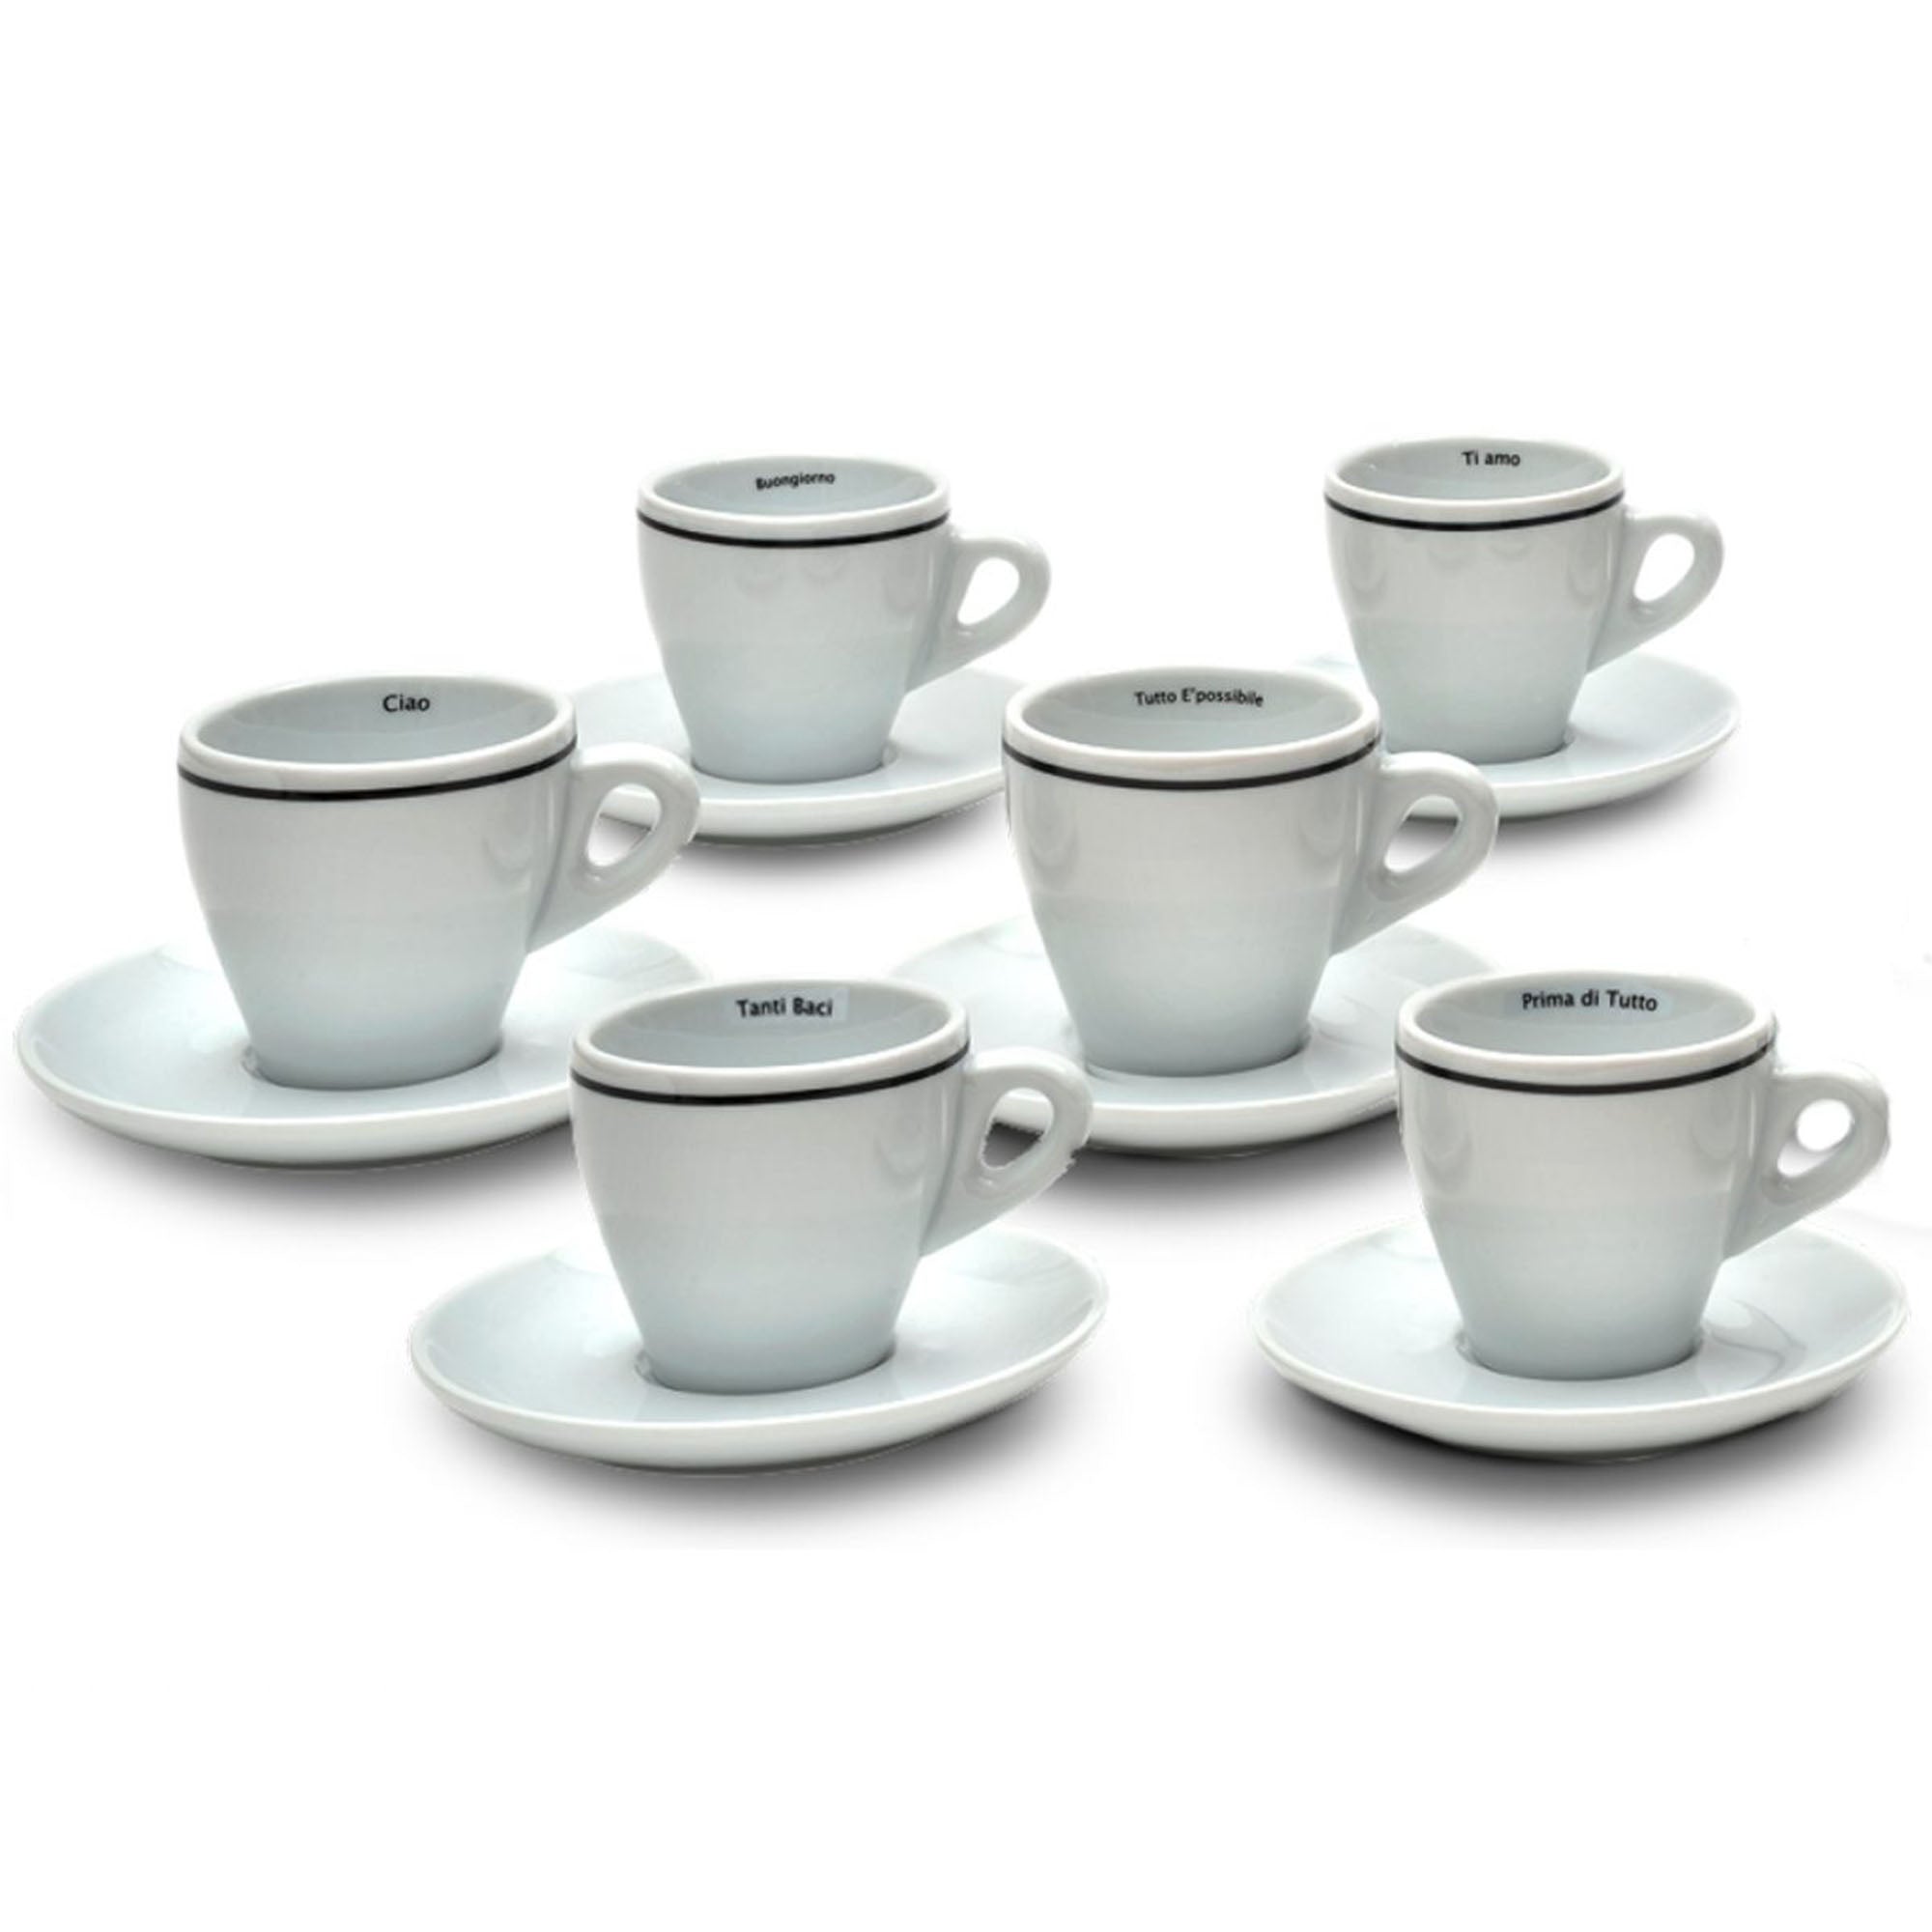 Club Napoli Espresso Cups--set of 6 cups and saucers